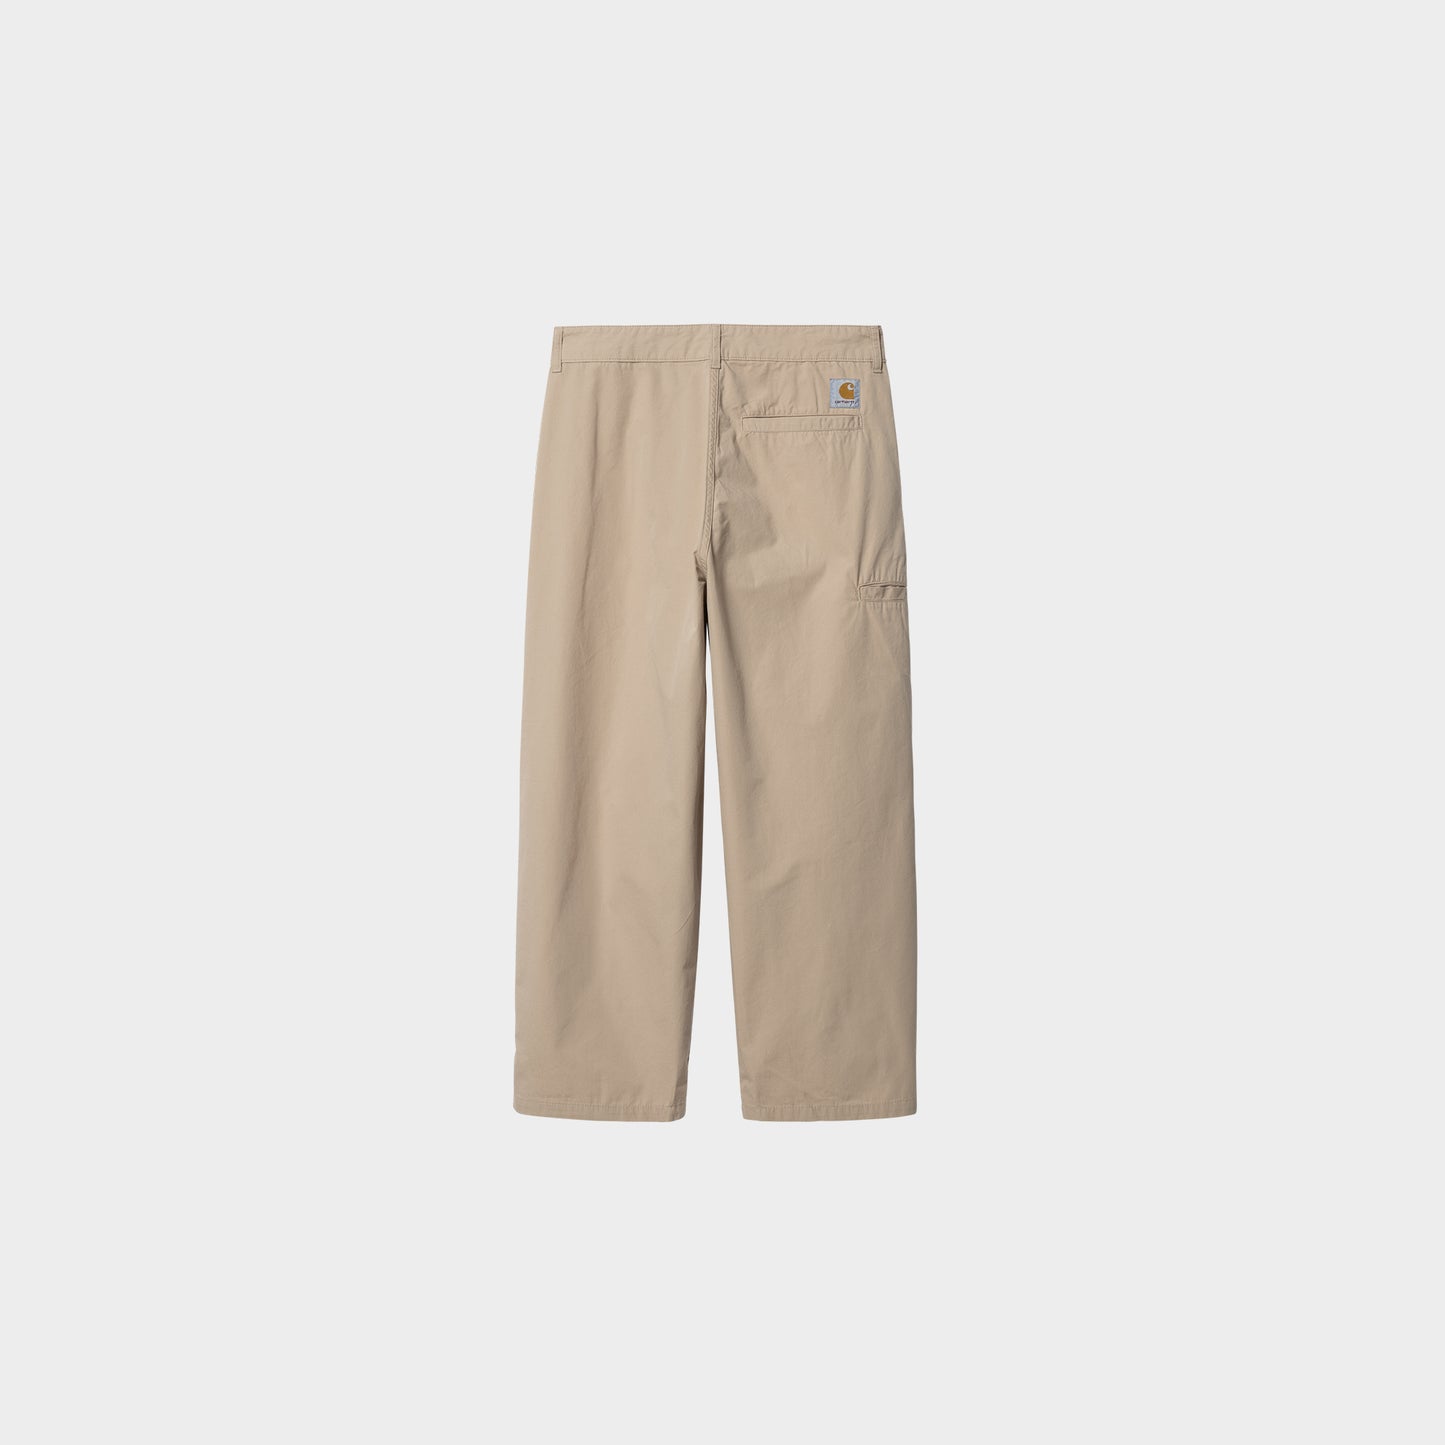 Carhartt WIP Colston Pant in der Farbe wall